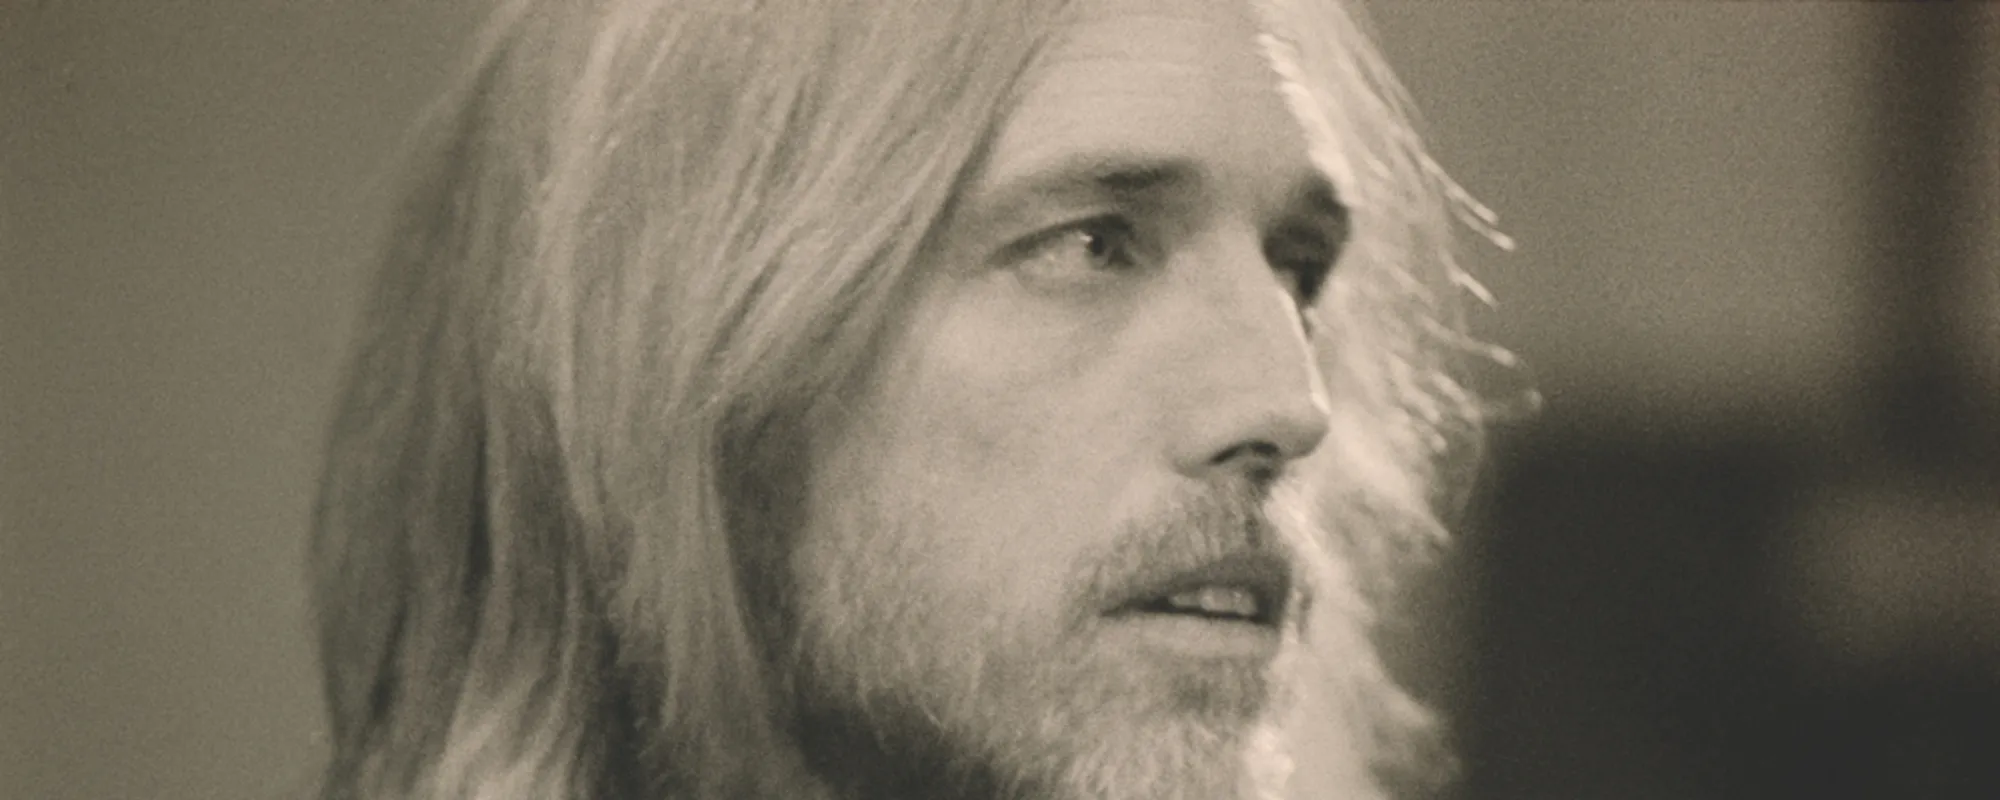 7 Songs You Didn’t Know Tom Petty Wrote for Other Artists